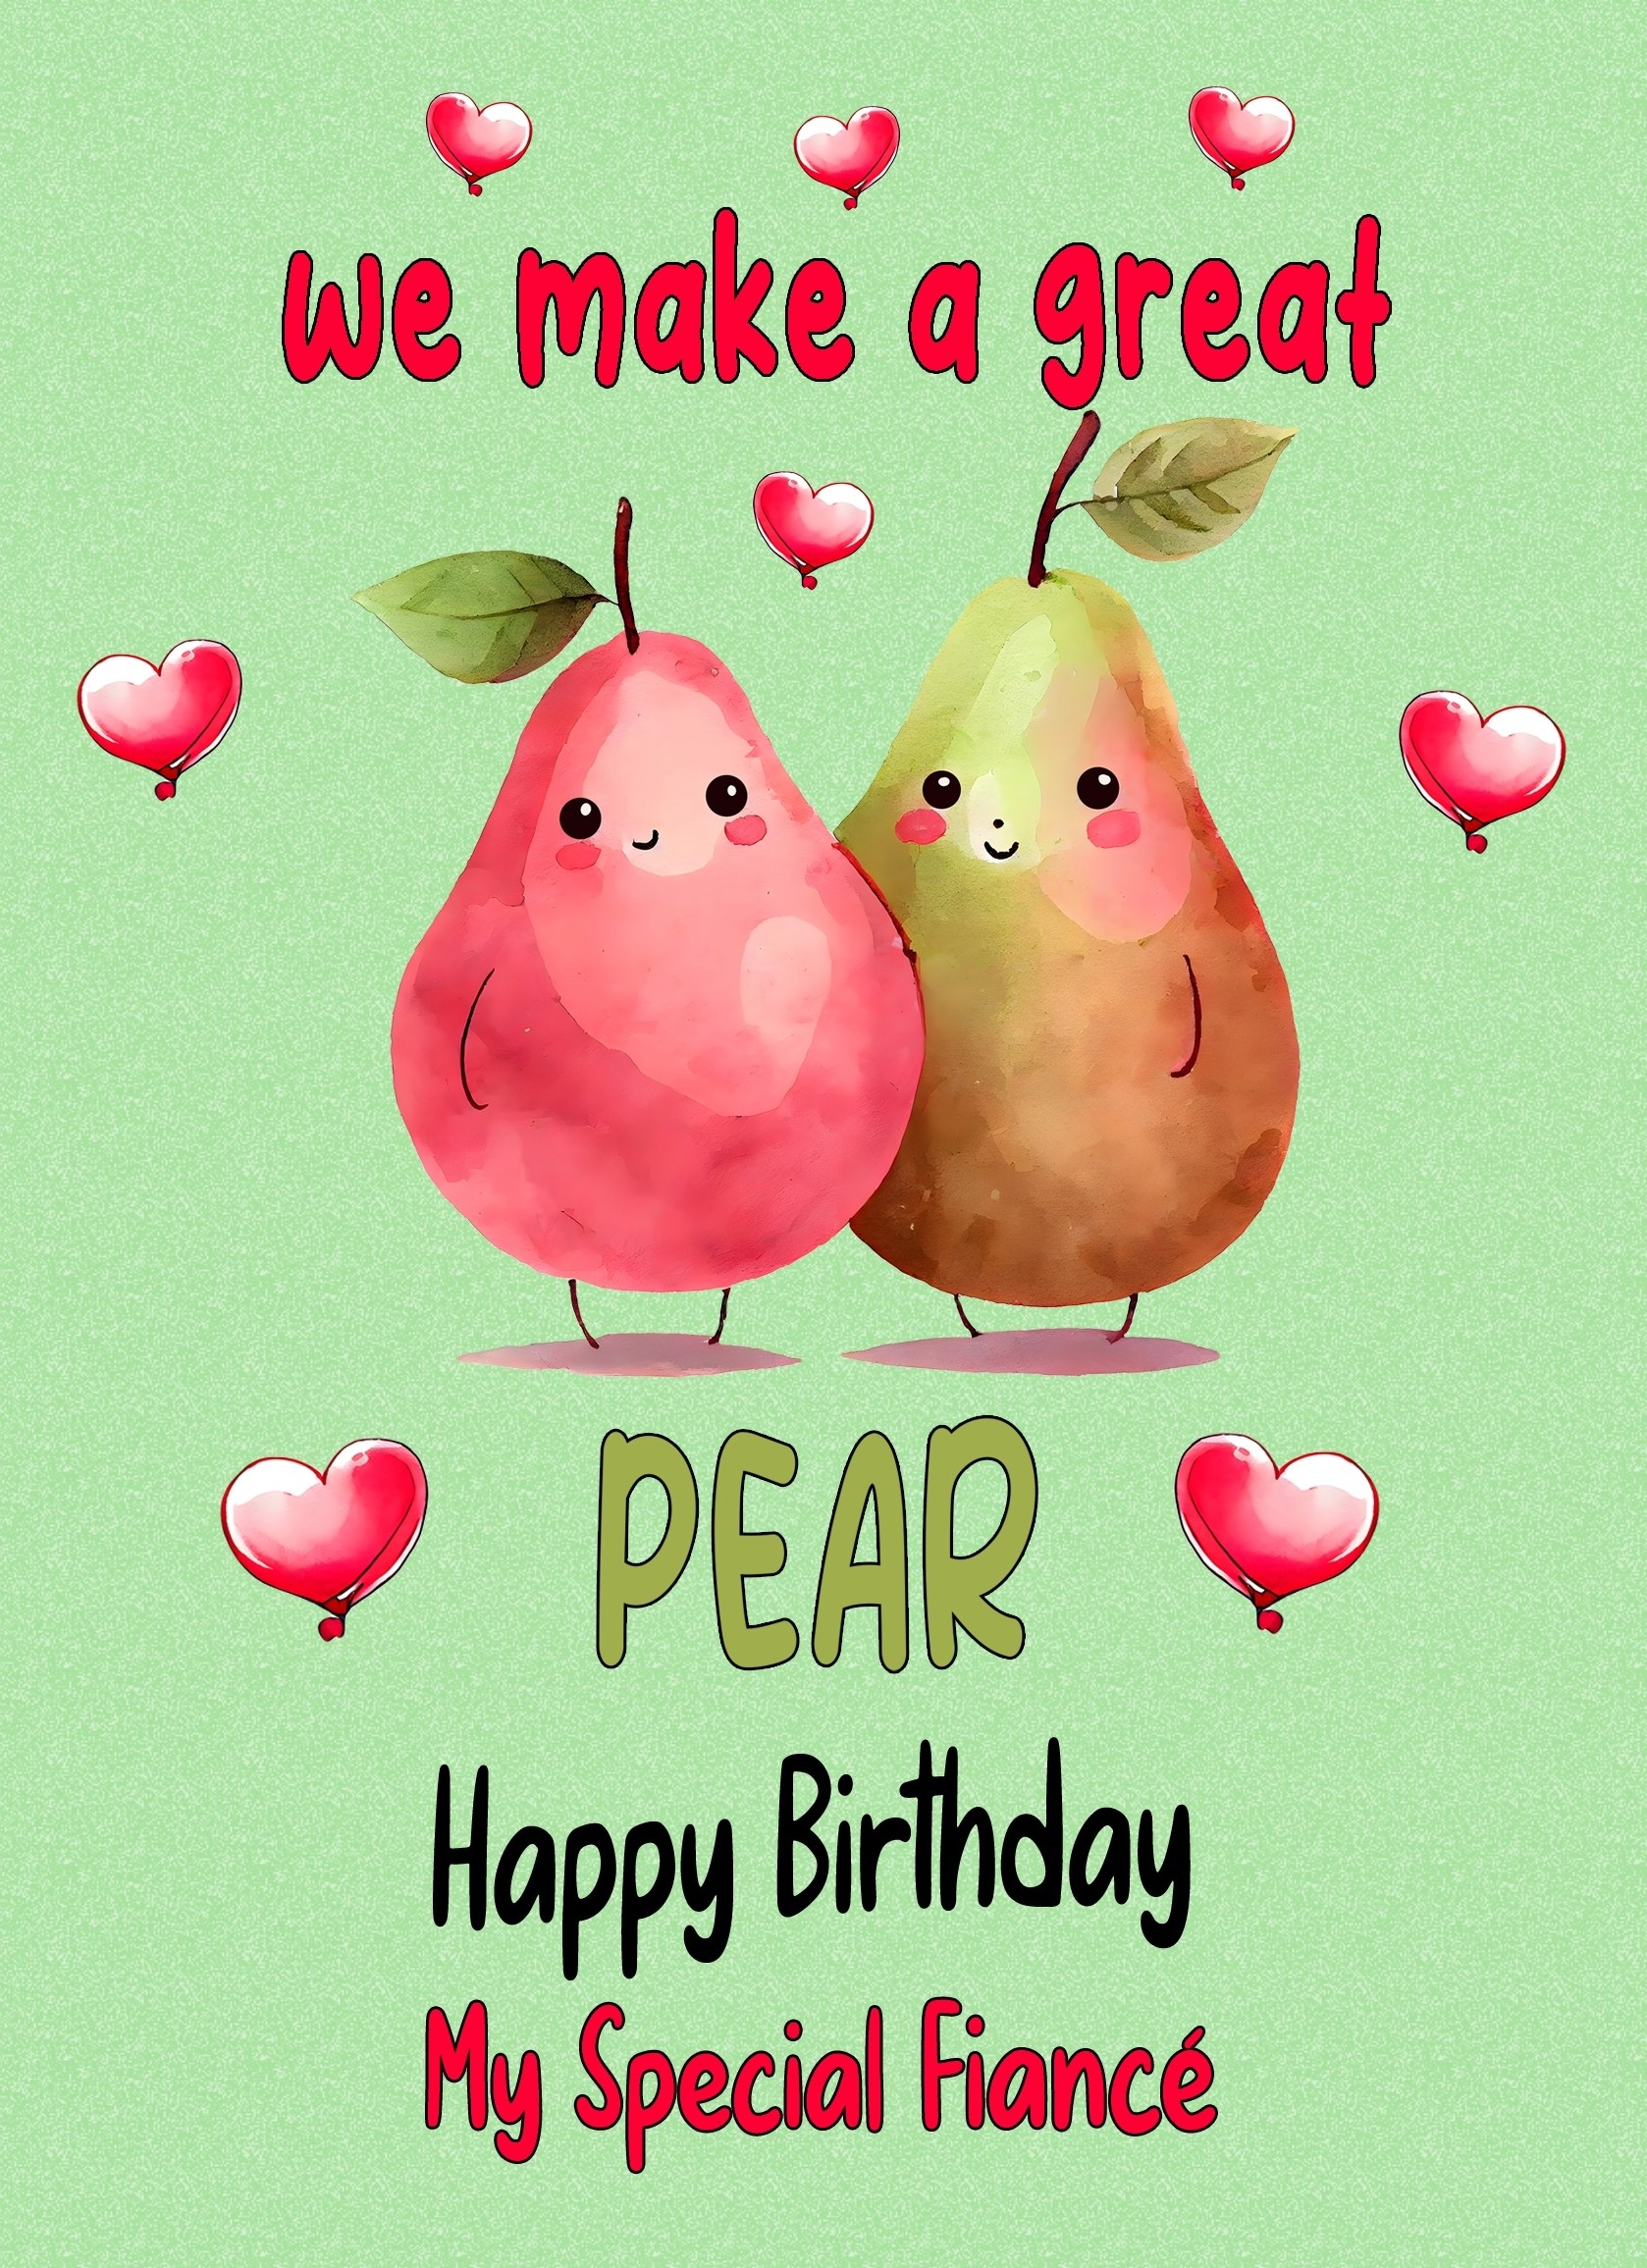 Funny Pun Romantic Birthday Card for Fiance (Great Pear)